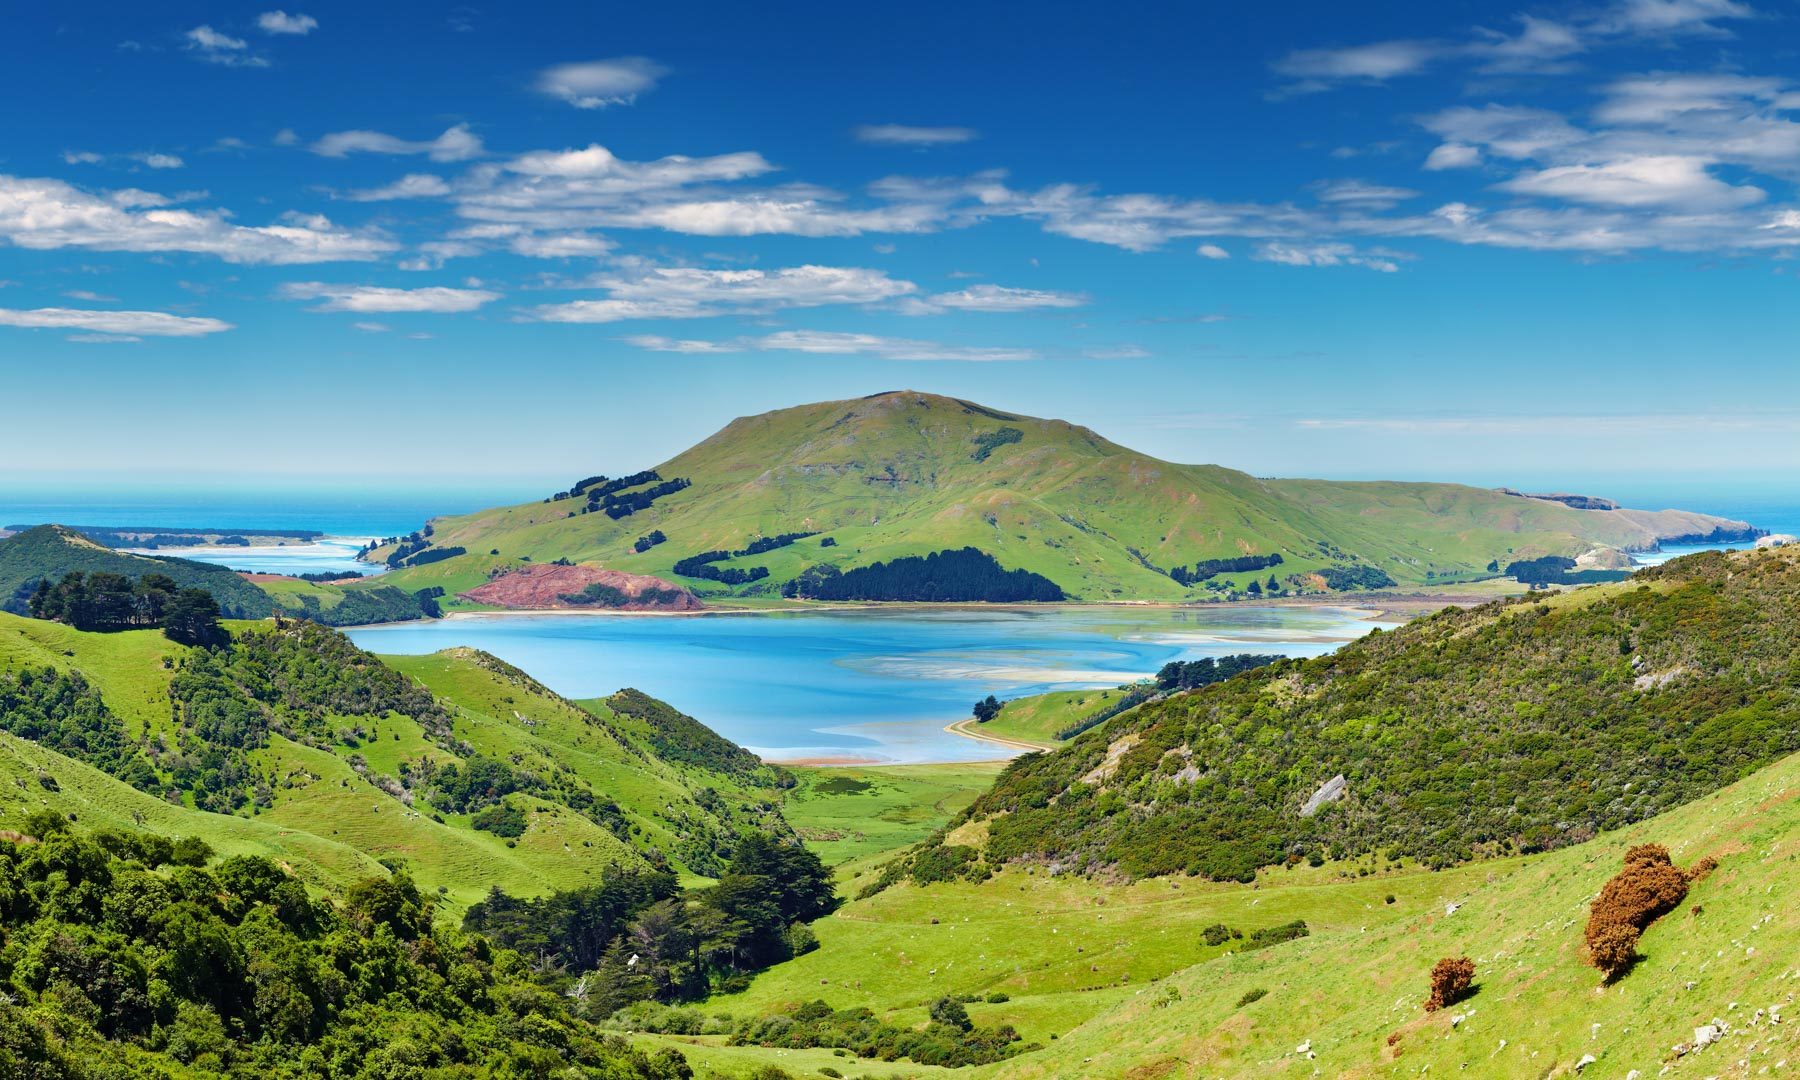 The Most Instagrammable Places in New Zealand